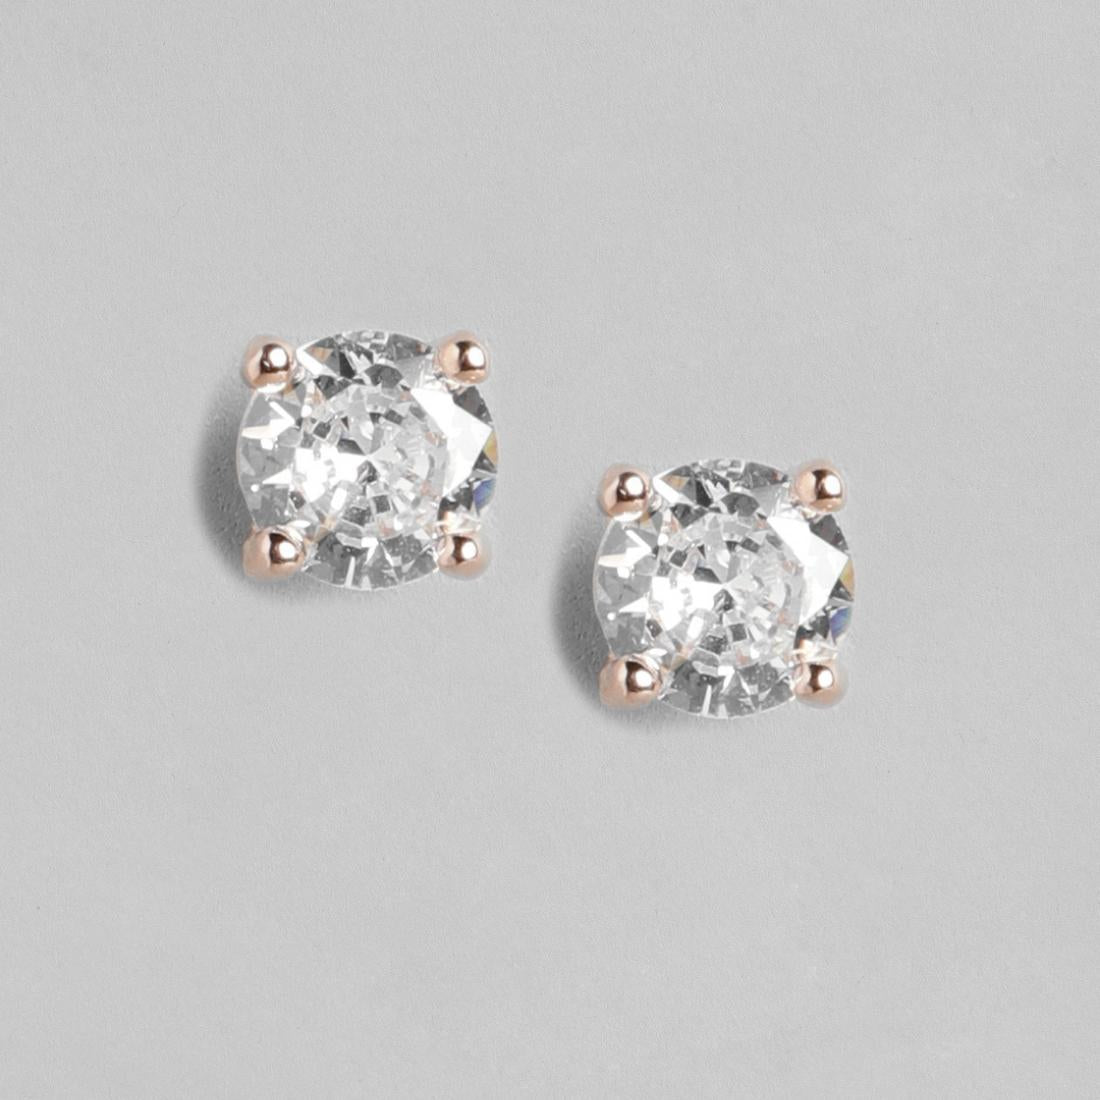 Sensational Solitaire 925 Silver Earrings In Rose Gold